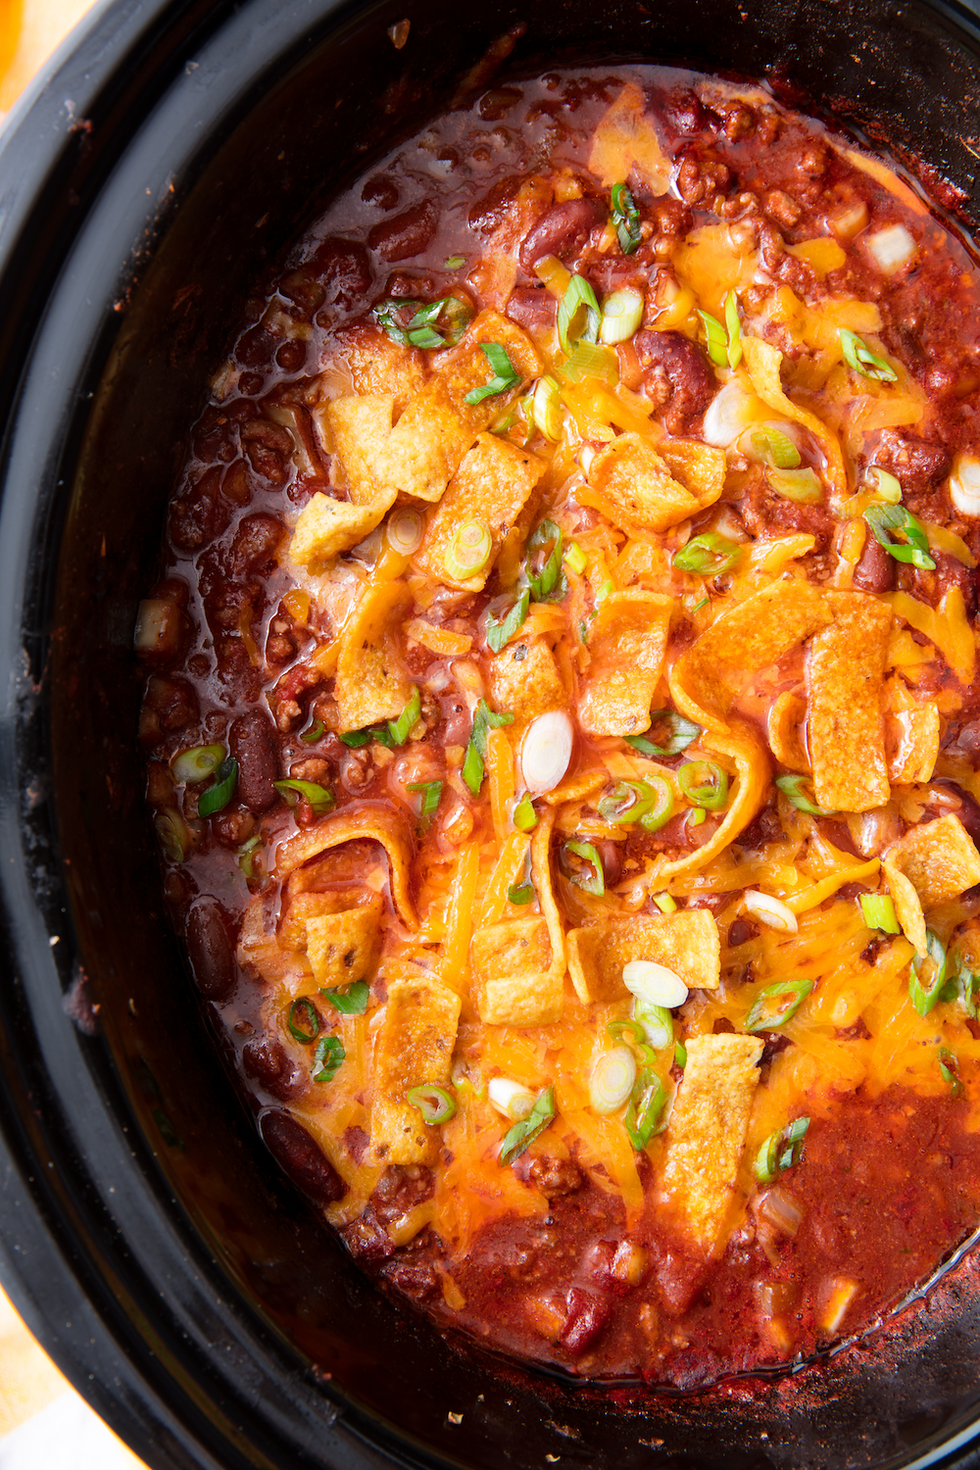 https://hips.hearstapps.com/hmg-prod/images/slow-cooker-chili-vertical-1529354148.png?crop=1xw:1xh;center,top&resize=980:*